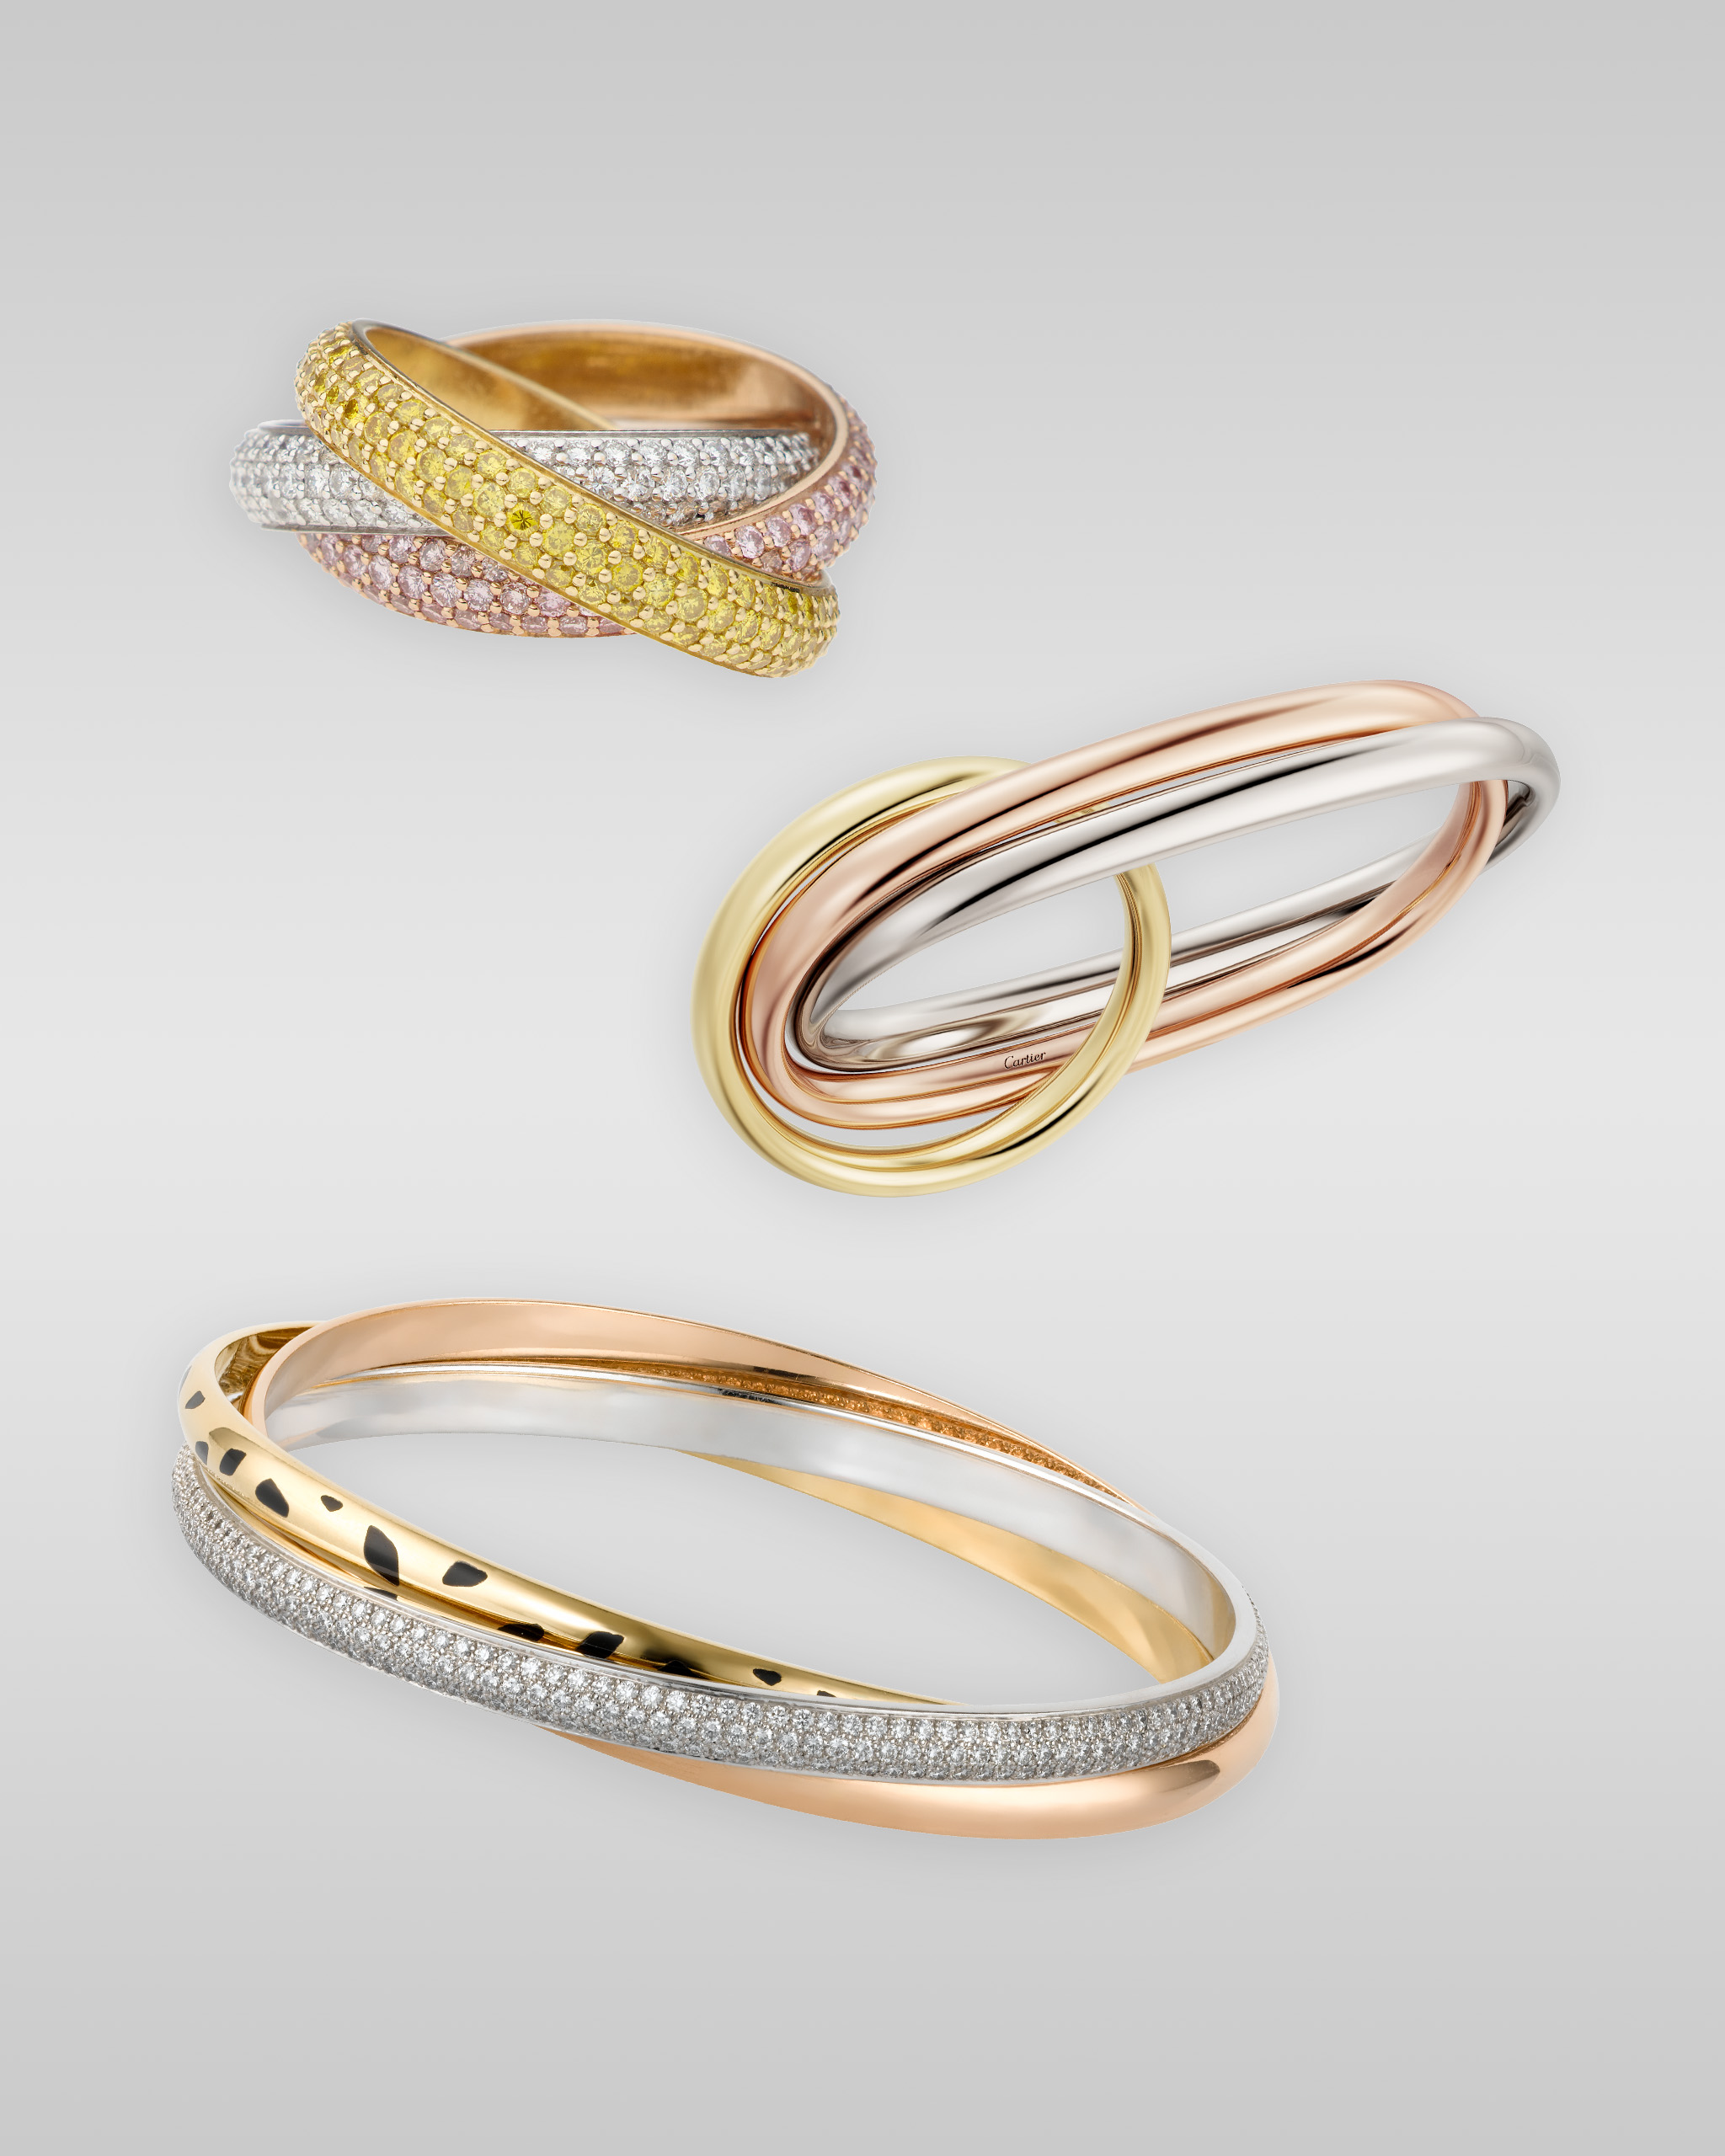 the trinity ring, chitose abe of sacai, trinity bracelet in white gold, rose gold, and yellow gold paved with diamonds